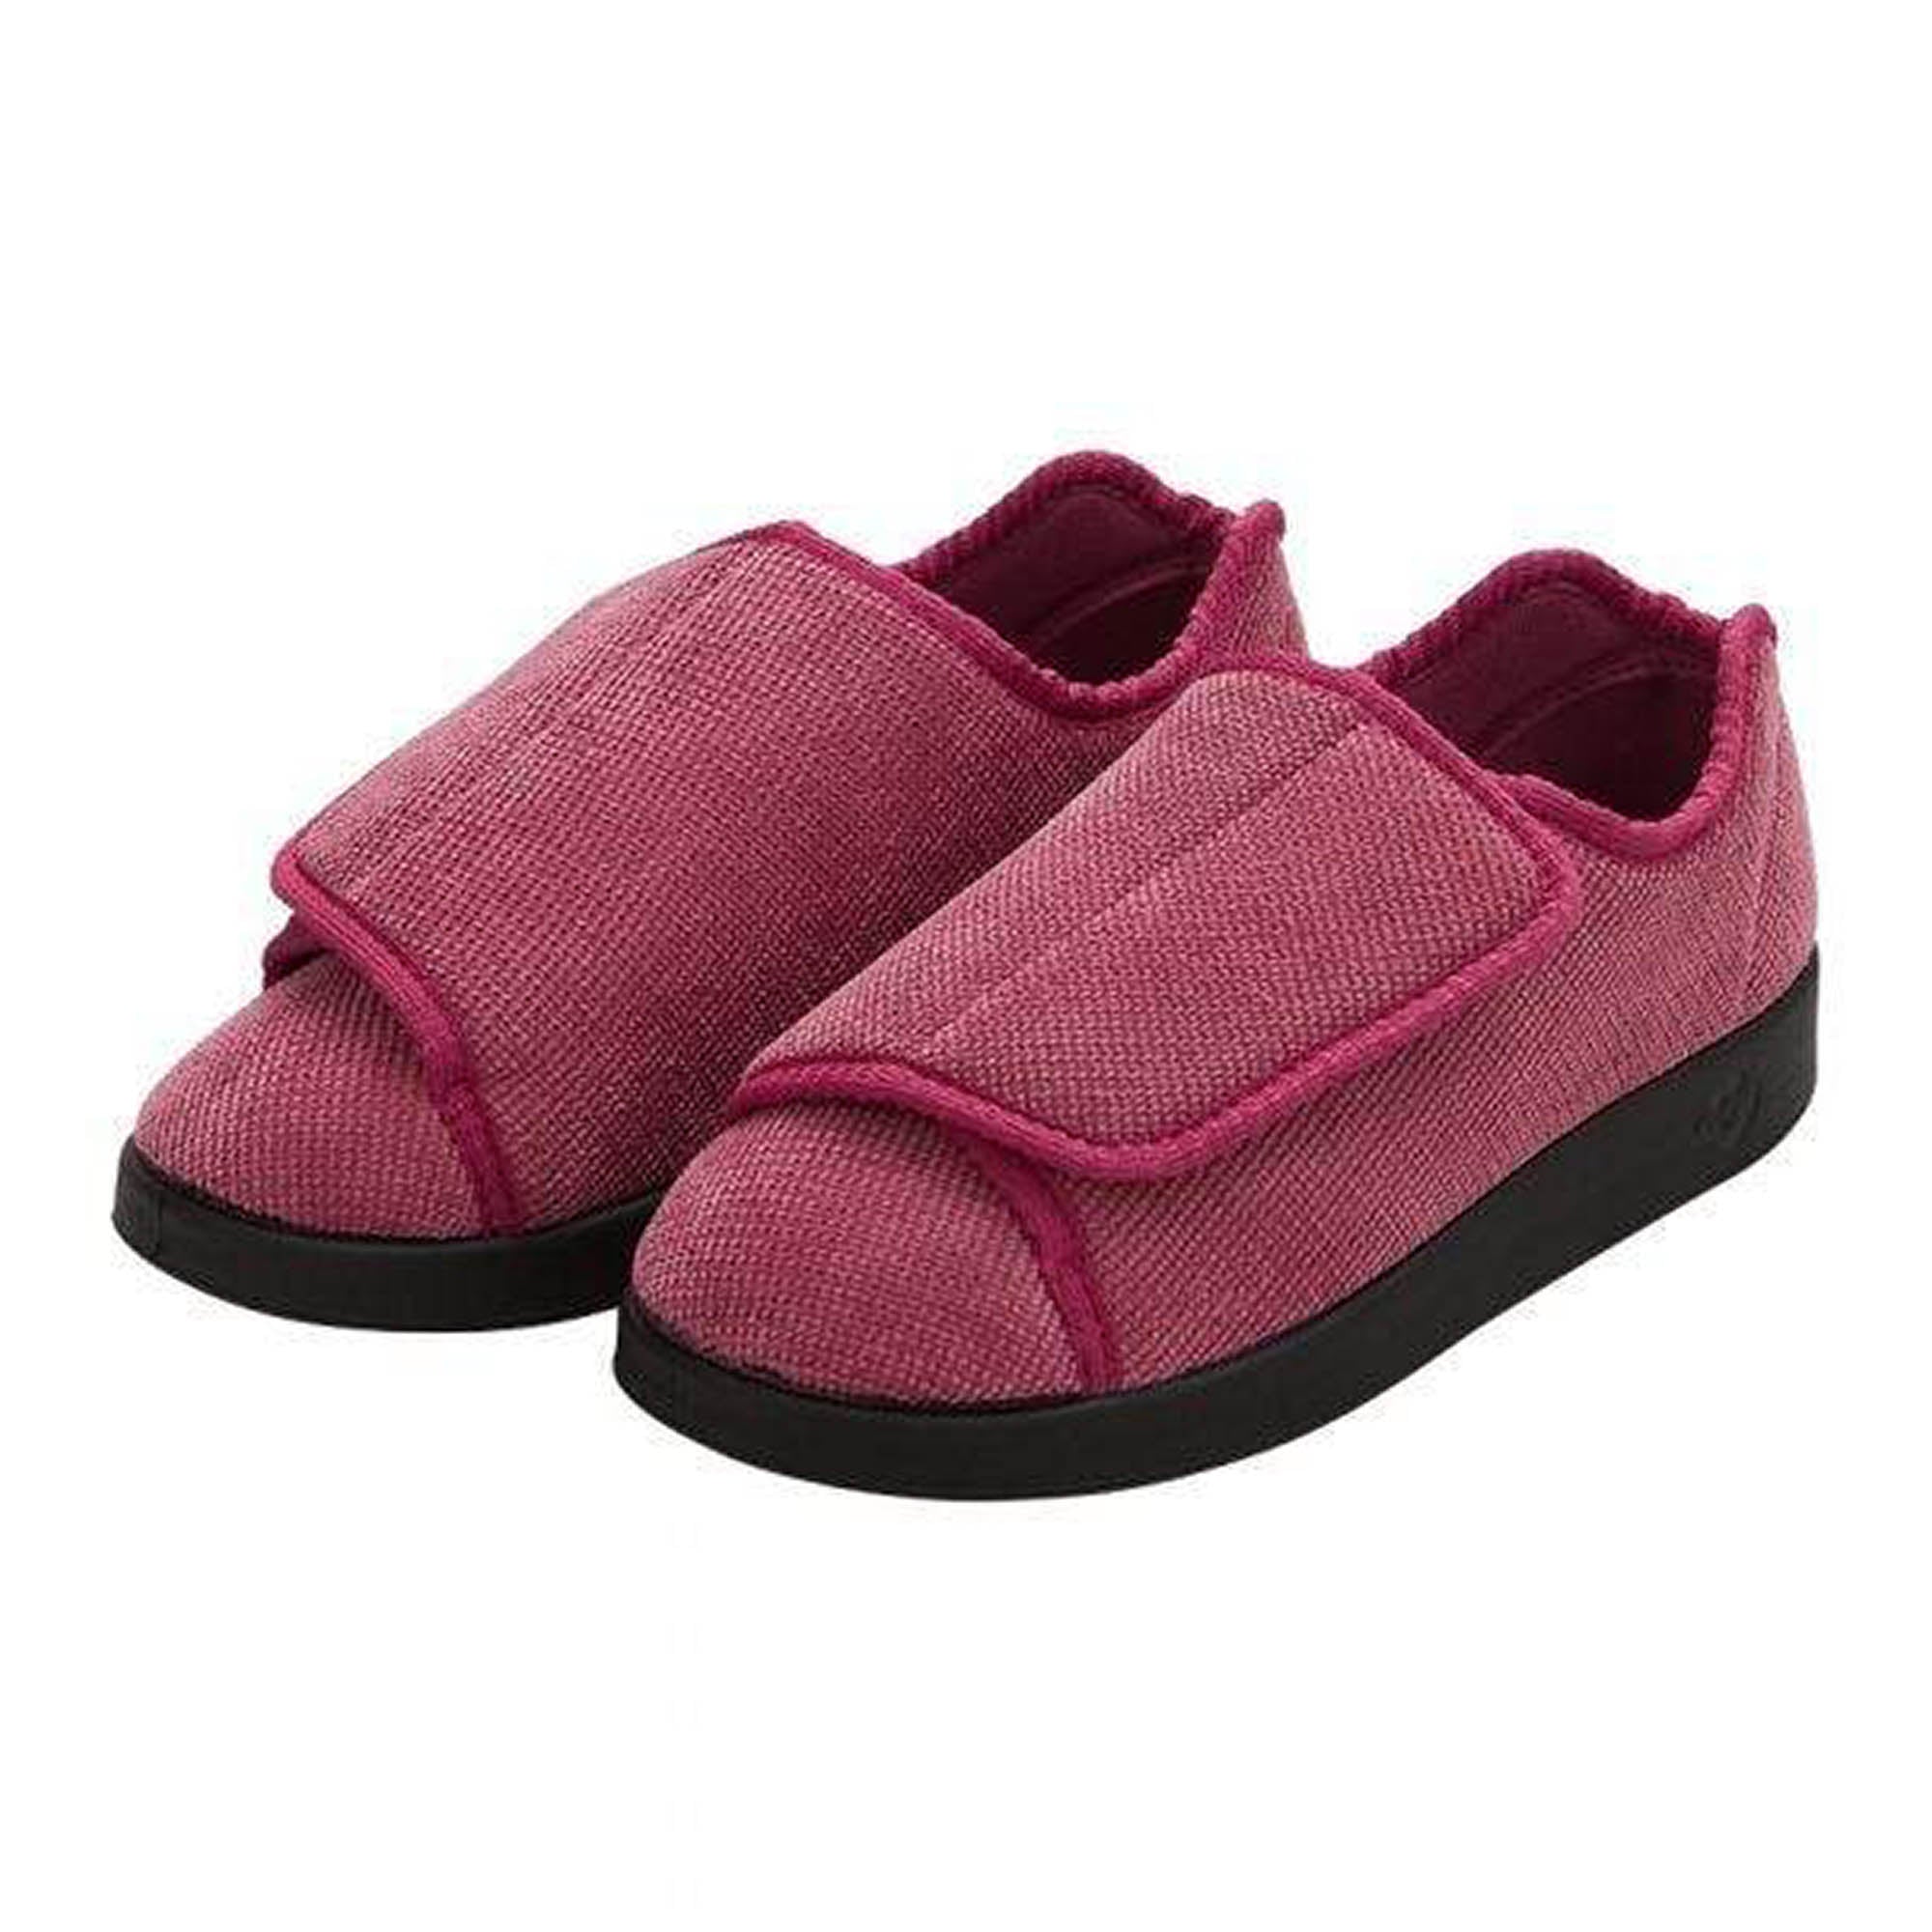 Silverts Women's Antimicrobial Extra Extra Wide Easy-Closure Slippers - Dusty Rose - 6